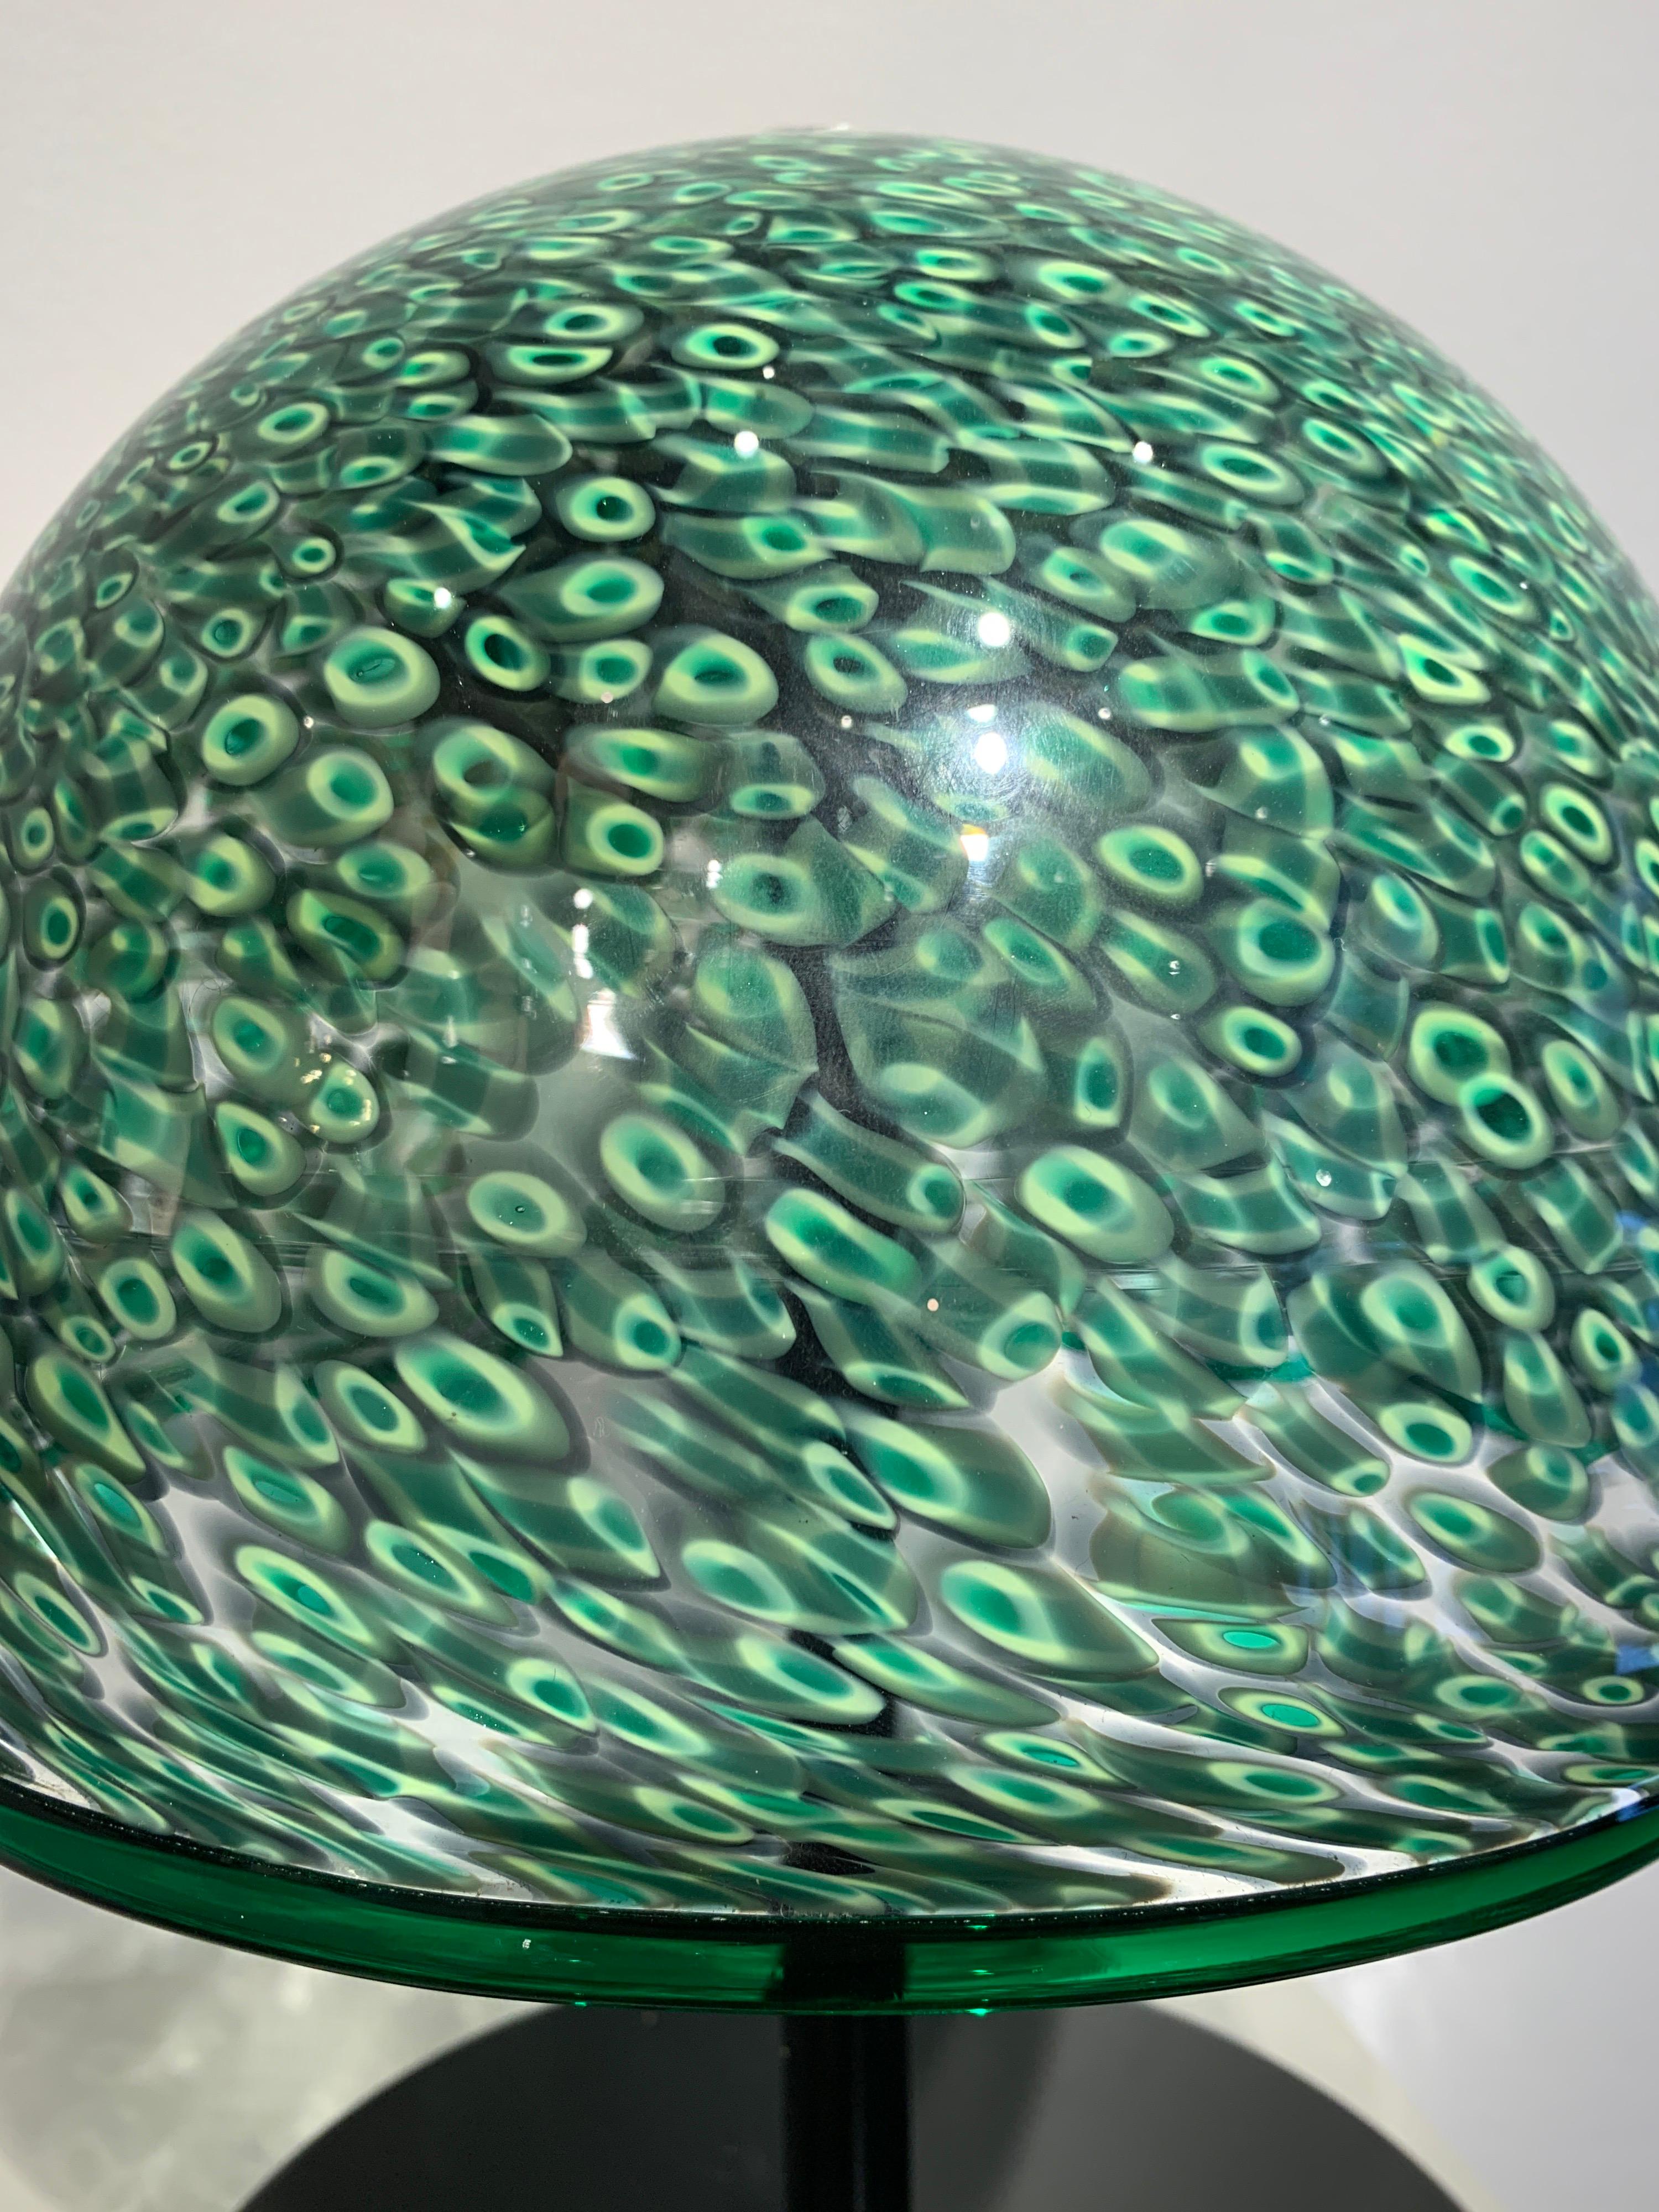 The lamp was designed by Gae Aulenti. The Murrine Glass by Vistosi, famous glass studio in Murano. The mosaic glass, is called Murrine. The lamp is signed Vistosi on the CAP. The foot is black metal.